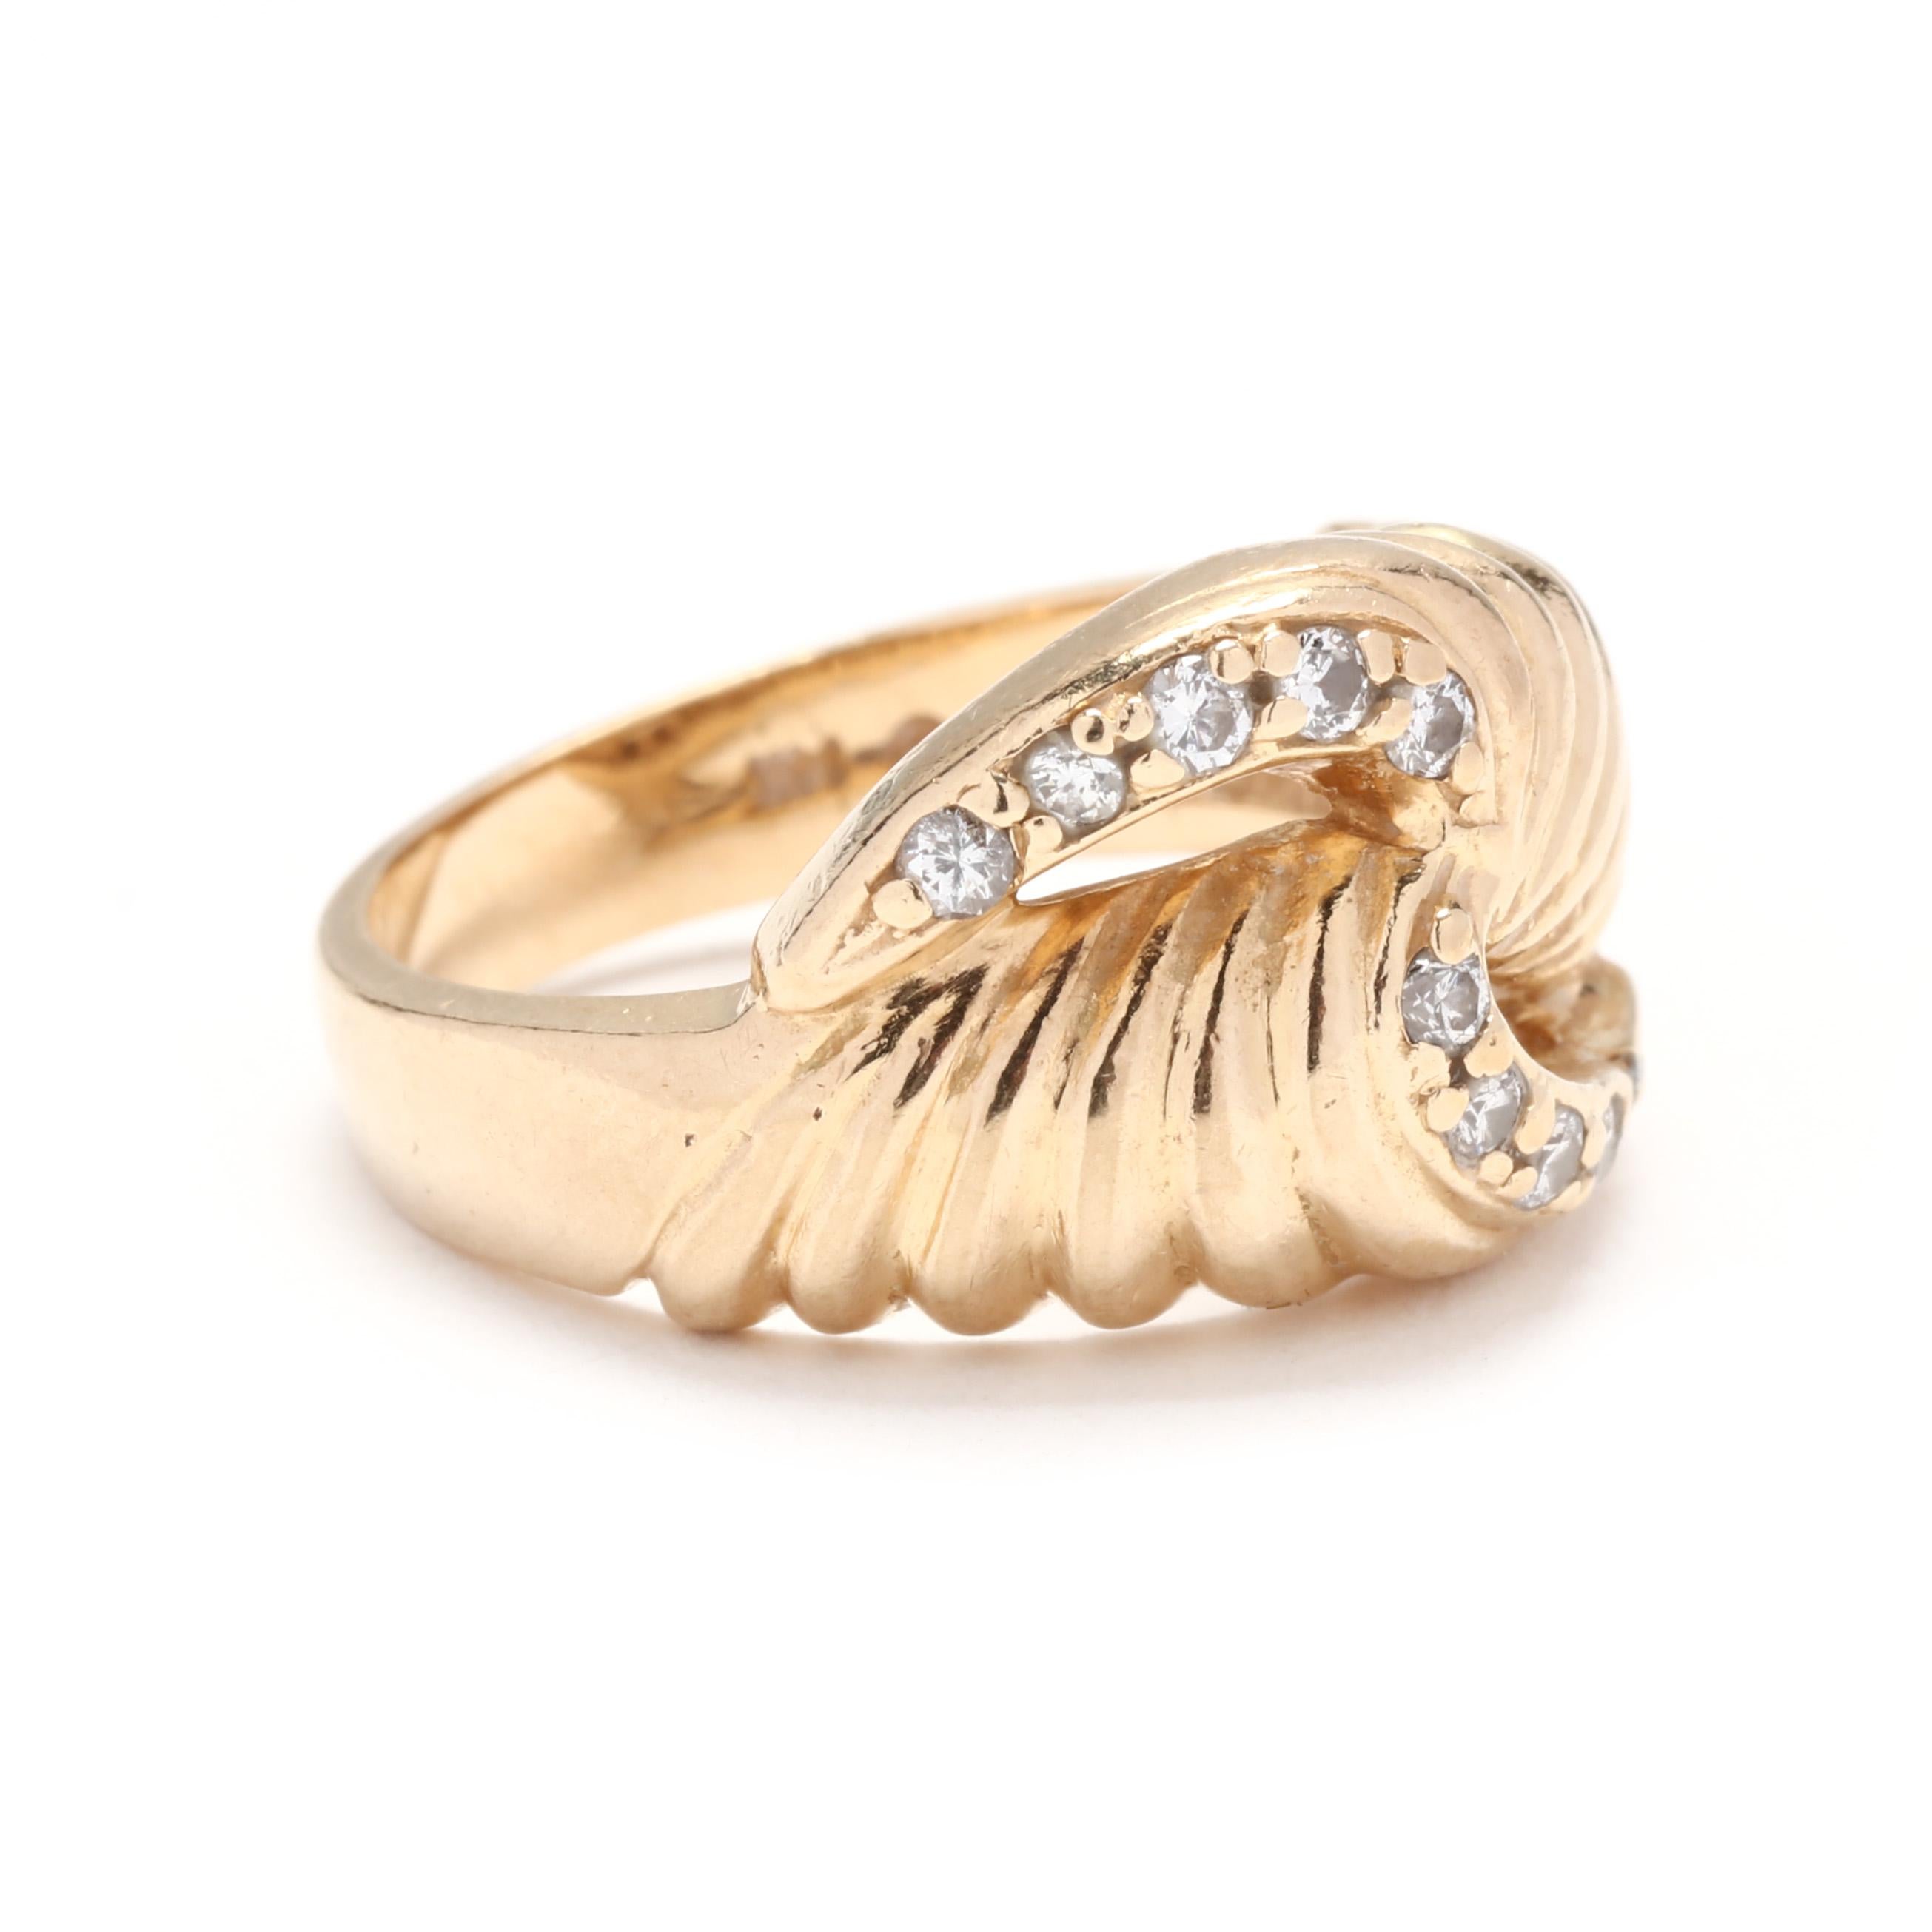 A vintage 14 karat yellow gold diamond knot cocktail ring. This vintage gold ring features an open ridged knot motif set with round brilliant cut diamonds weighing approximately .20 total carats and with a split band.

Stones:
- diamonds, 10